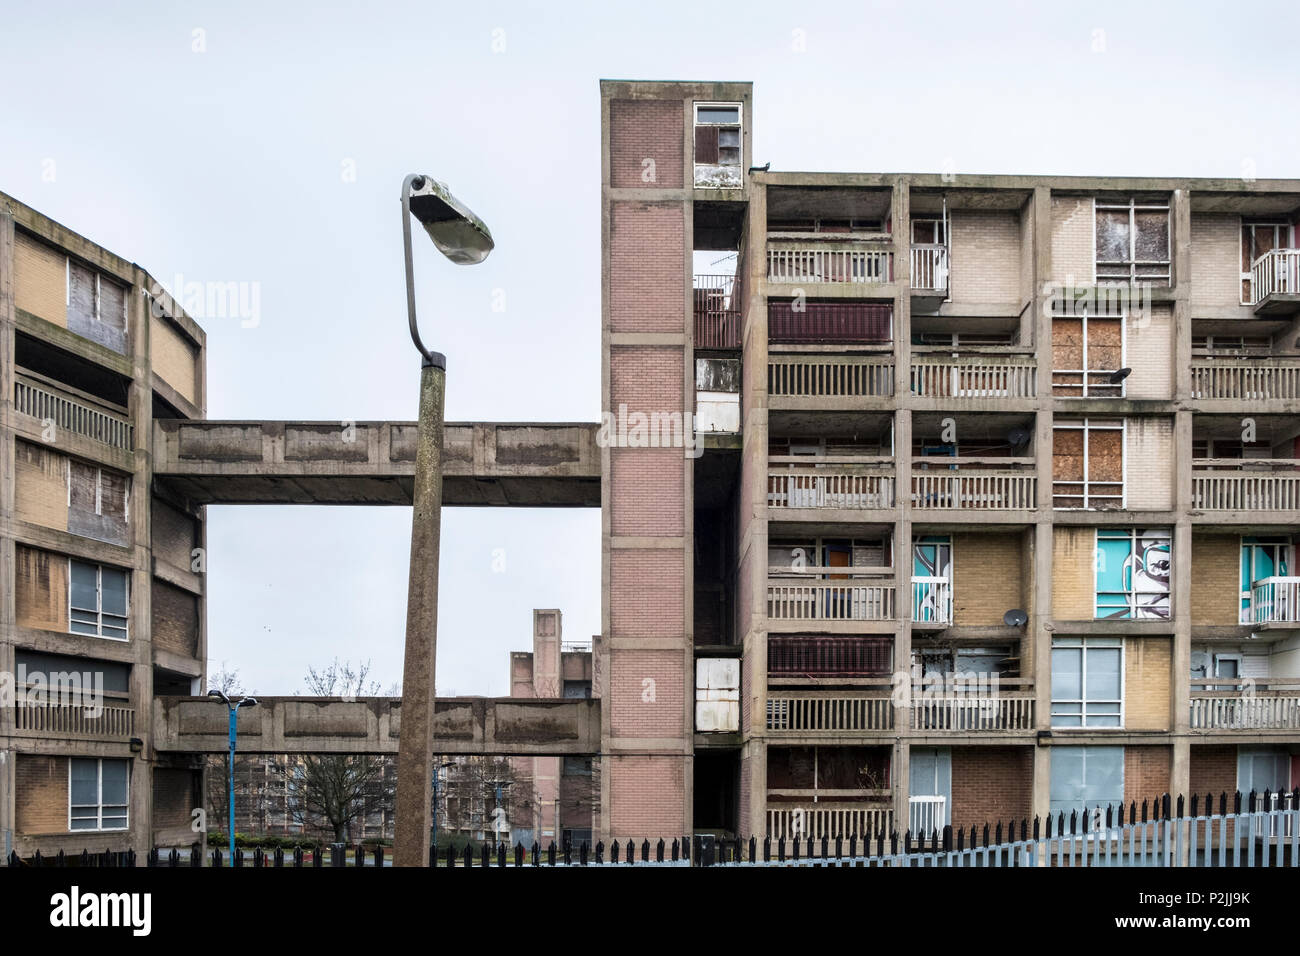 Run down residential buildings. 1950s Brutalist architecture at Park Hill flats, Sheffield, England, UK. Stock Photo